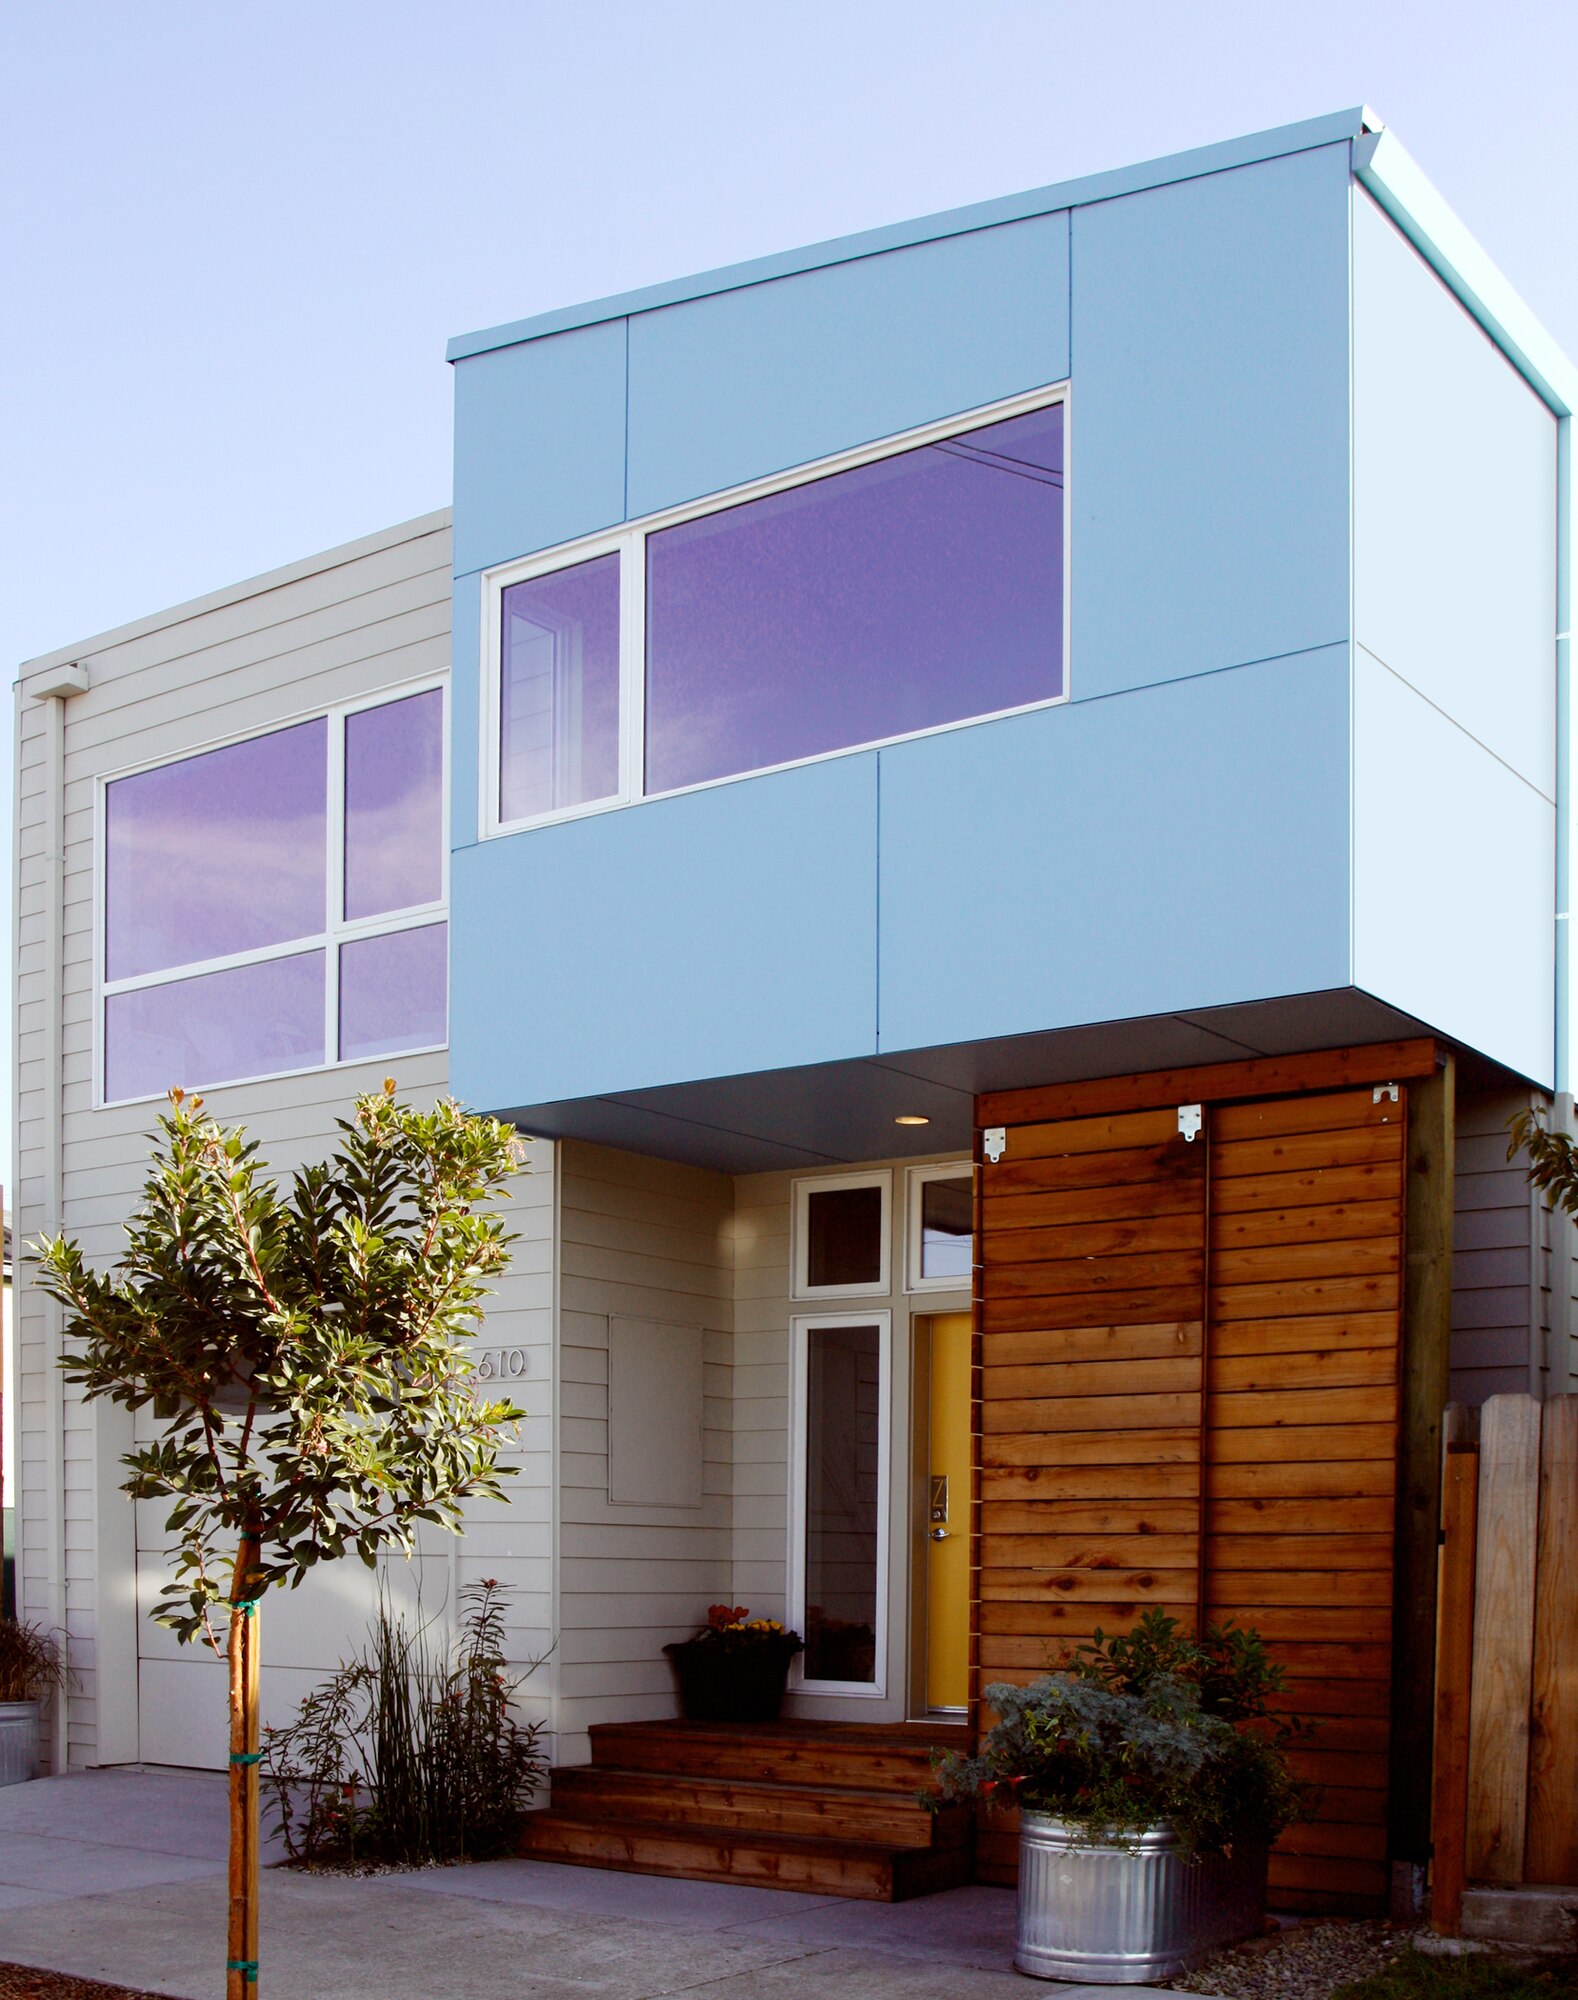 This energy efficient modular home, built by workers at ZETA Communities, won Green Builder magazine's home of the year award.  ZETA's factory at the former McClellan Air Force Base, Calif., can produce two townhouses per day. (Courtesy photo)